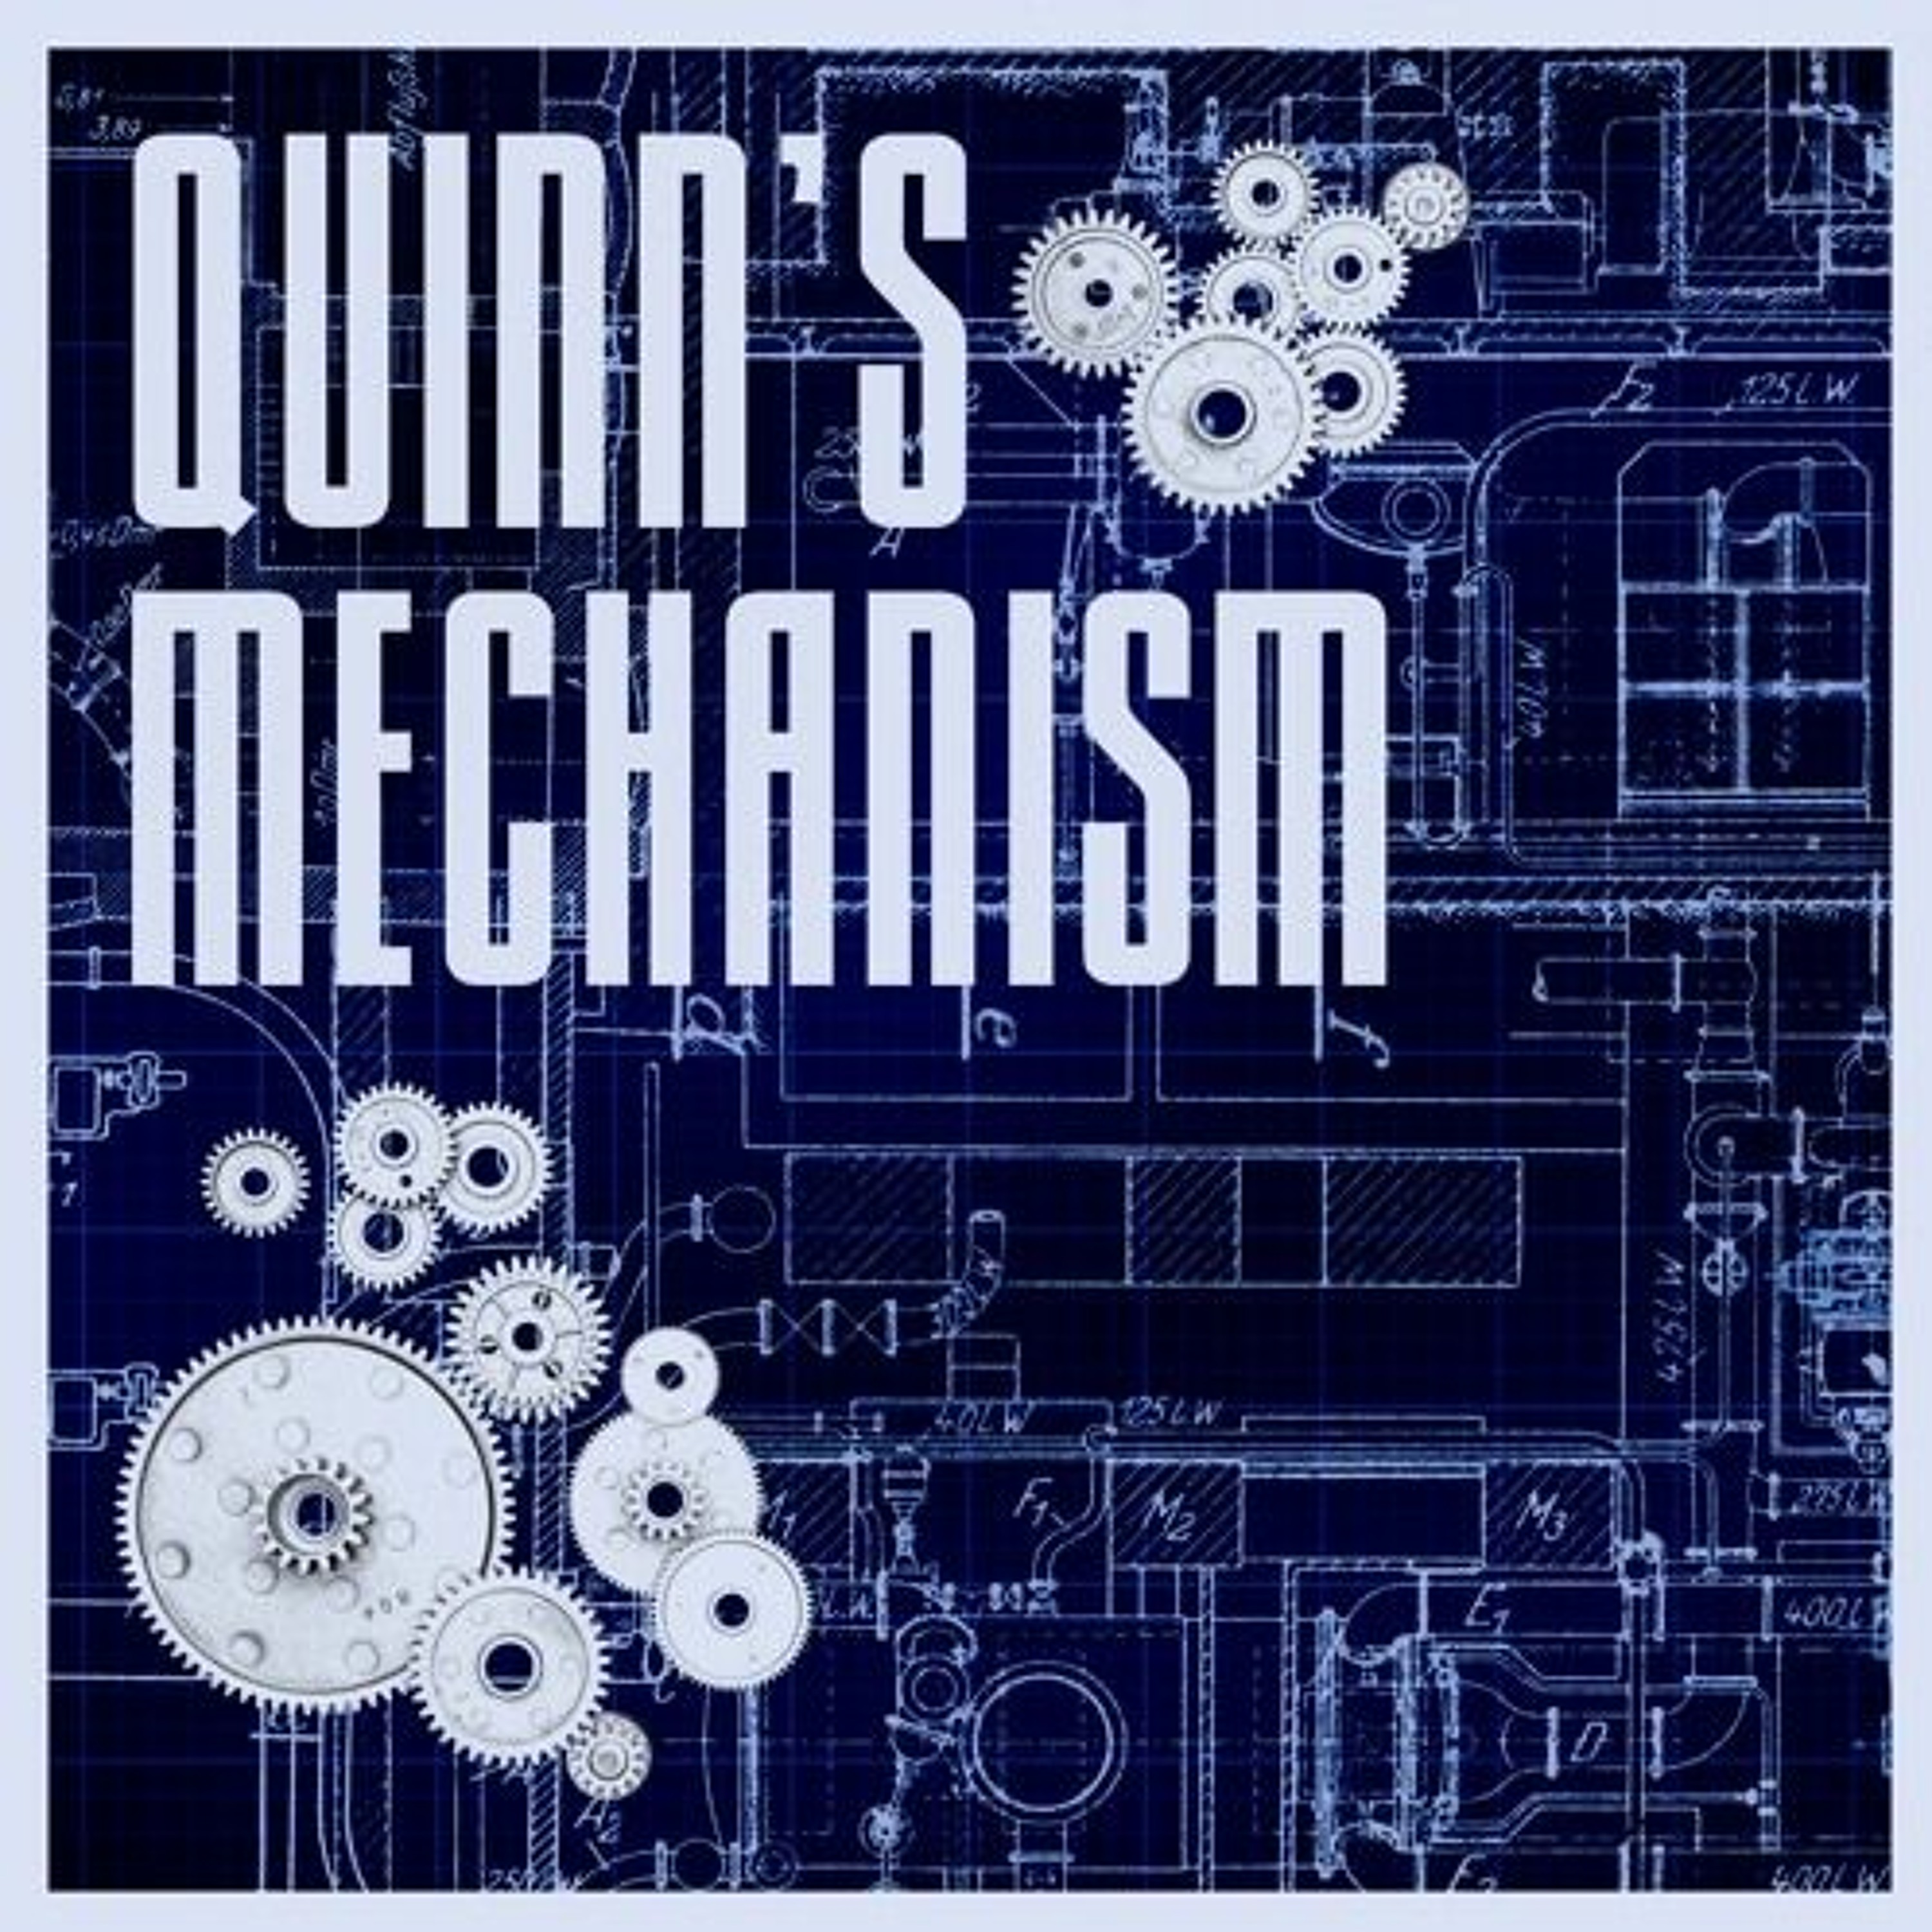 Quinn's Mechanism - Second Act, The Fifth Component